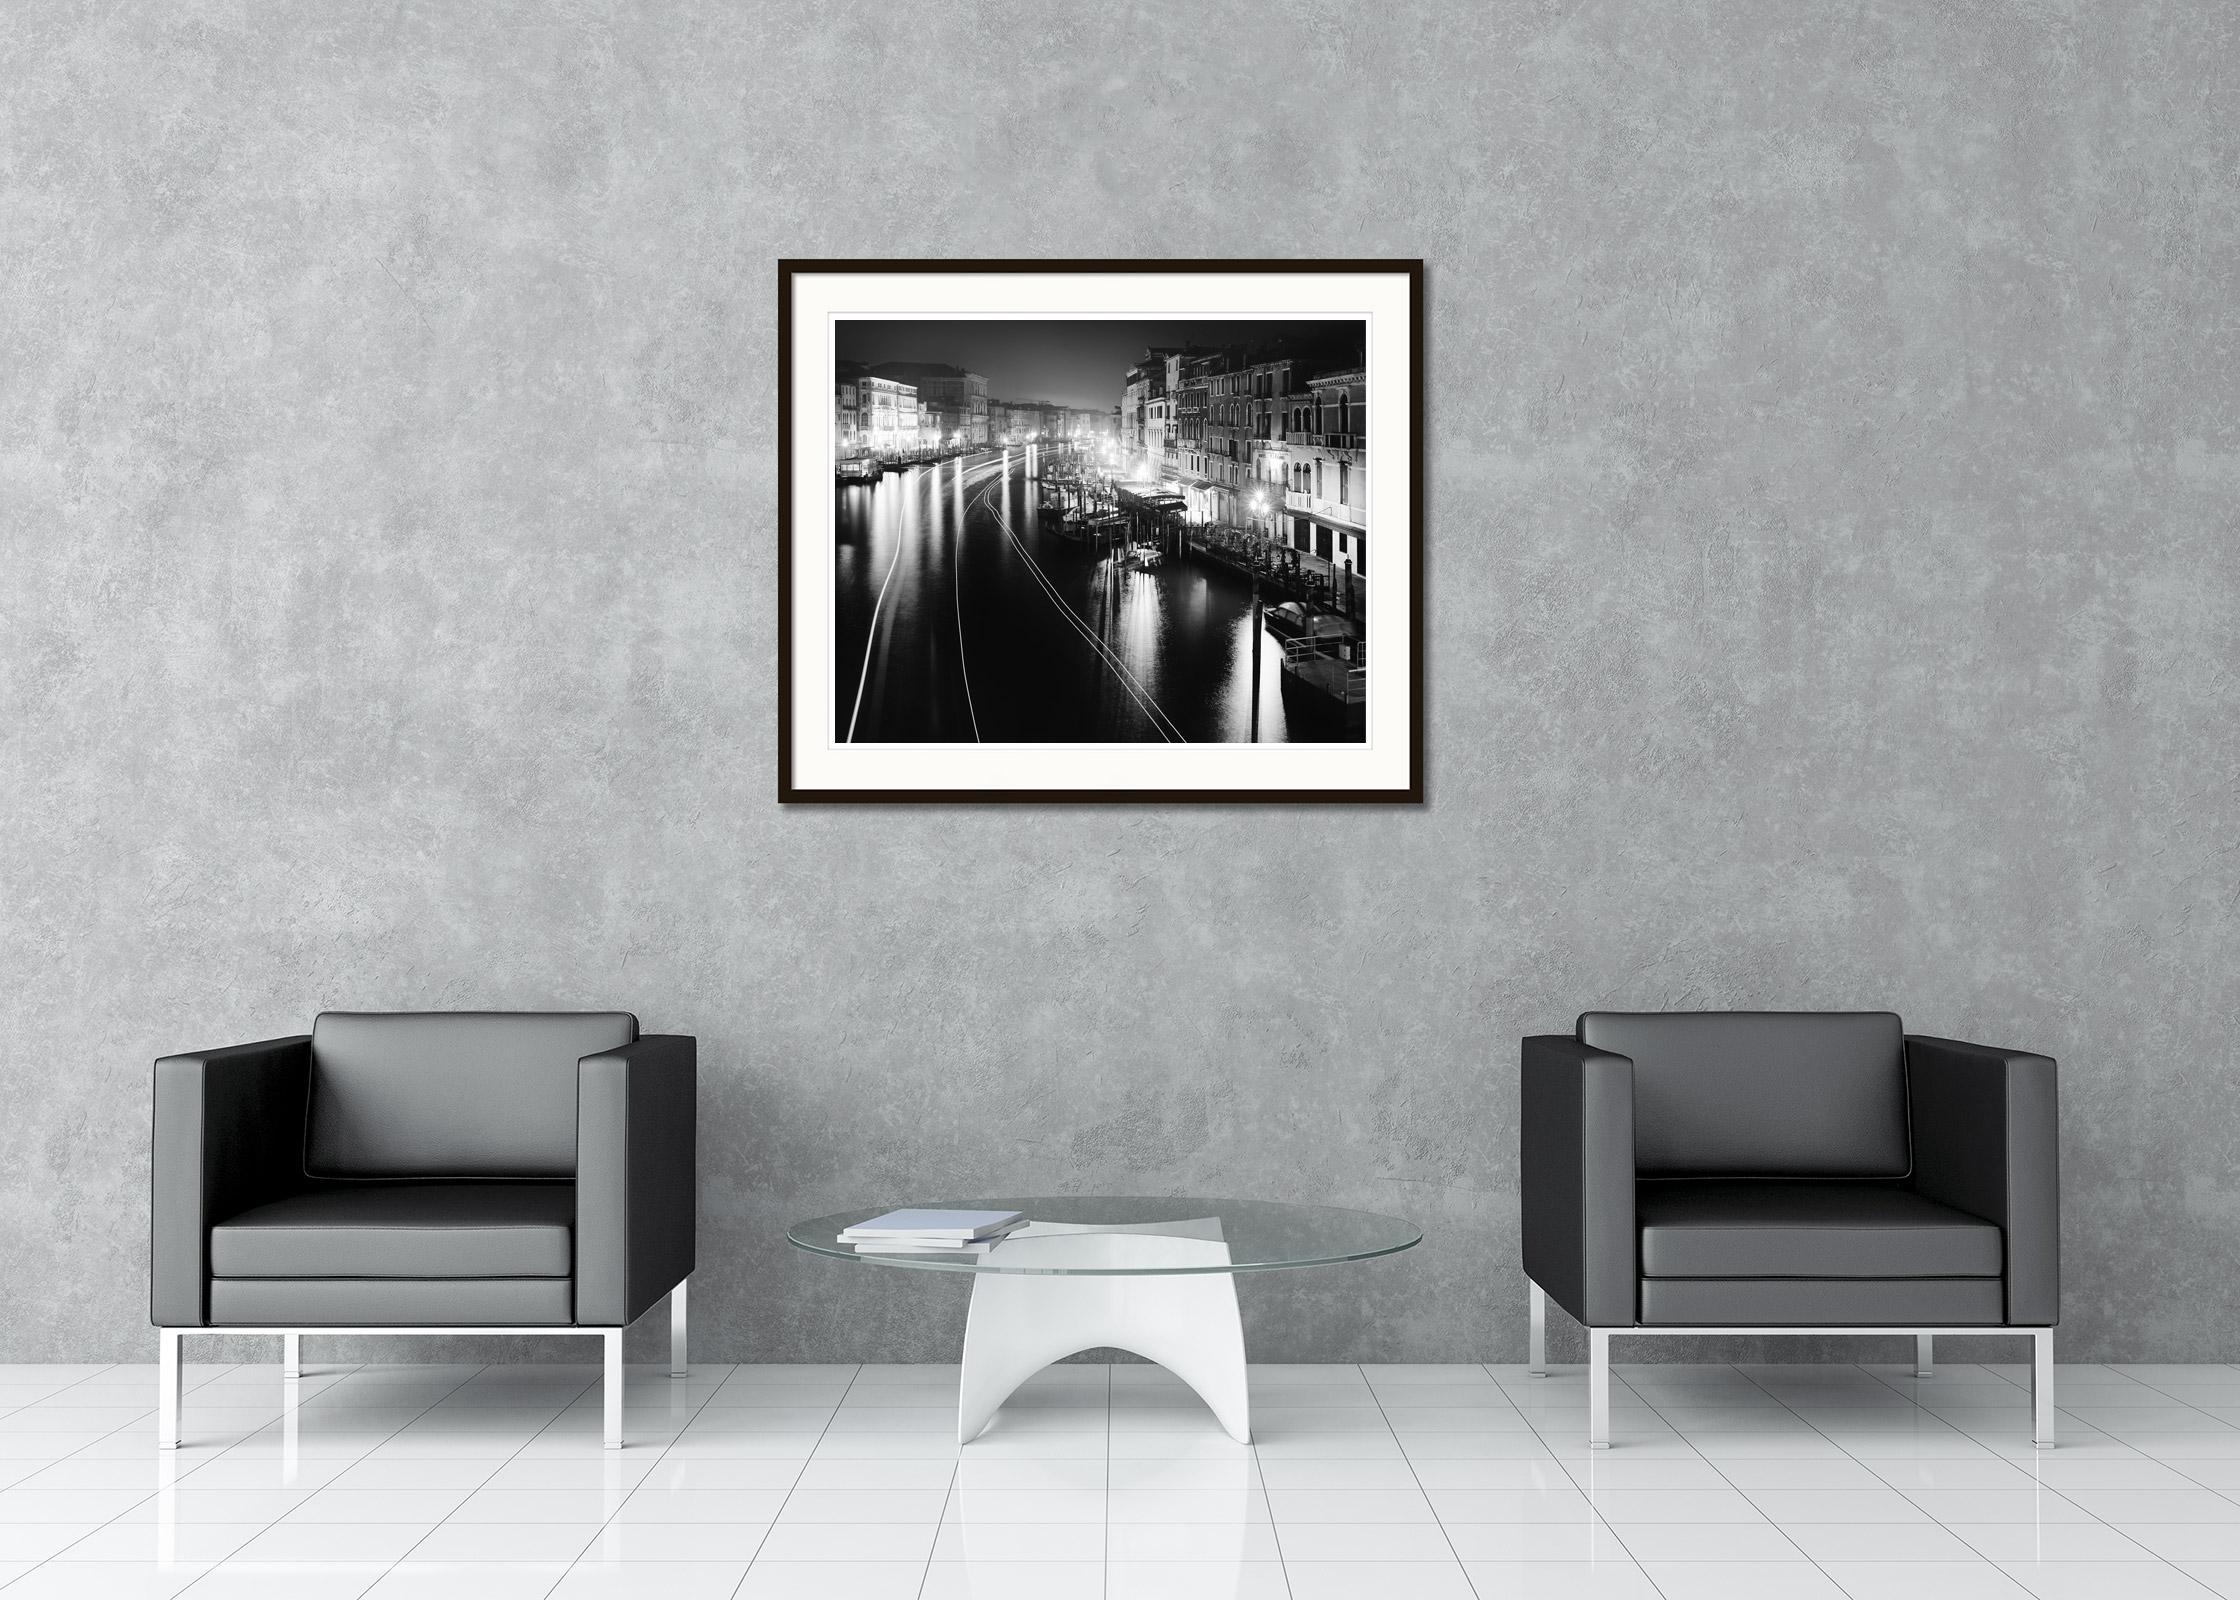 Black and white fine art long exposure waterscape - cityscape photography. Archival pigment ink print as part of a limited edition of 15. All Gerald Berghammer prints are made to order in limited editions on Hahnemuehle Photo Rag Baryta. Each print